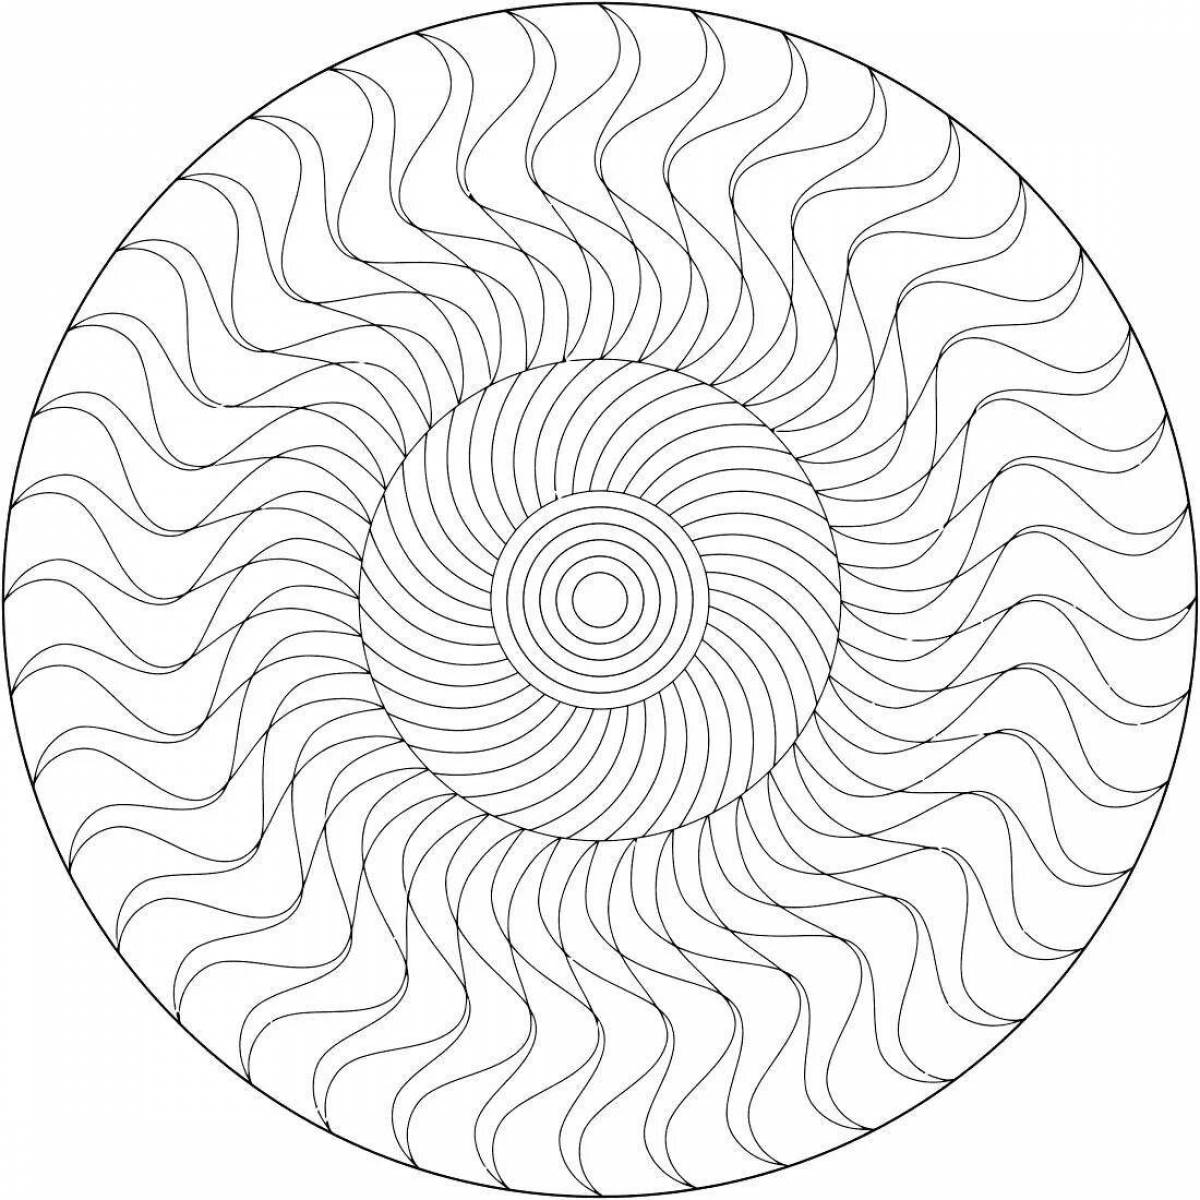 Relaxing anti-stress spiral coloring book